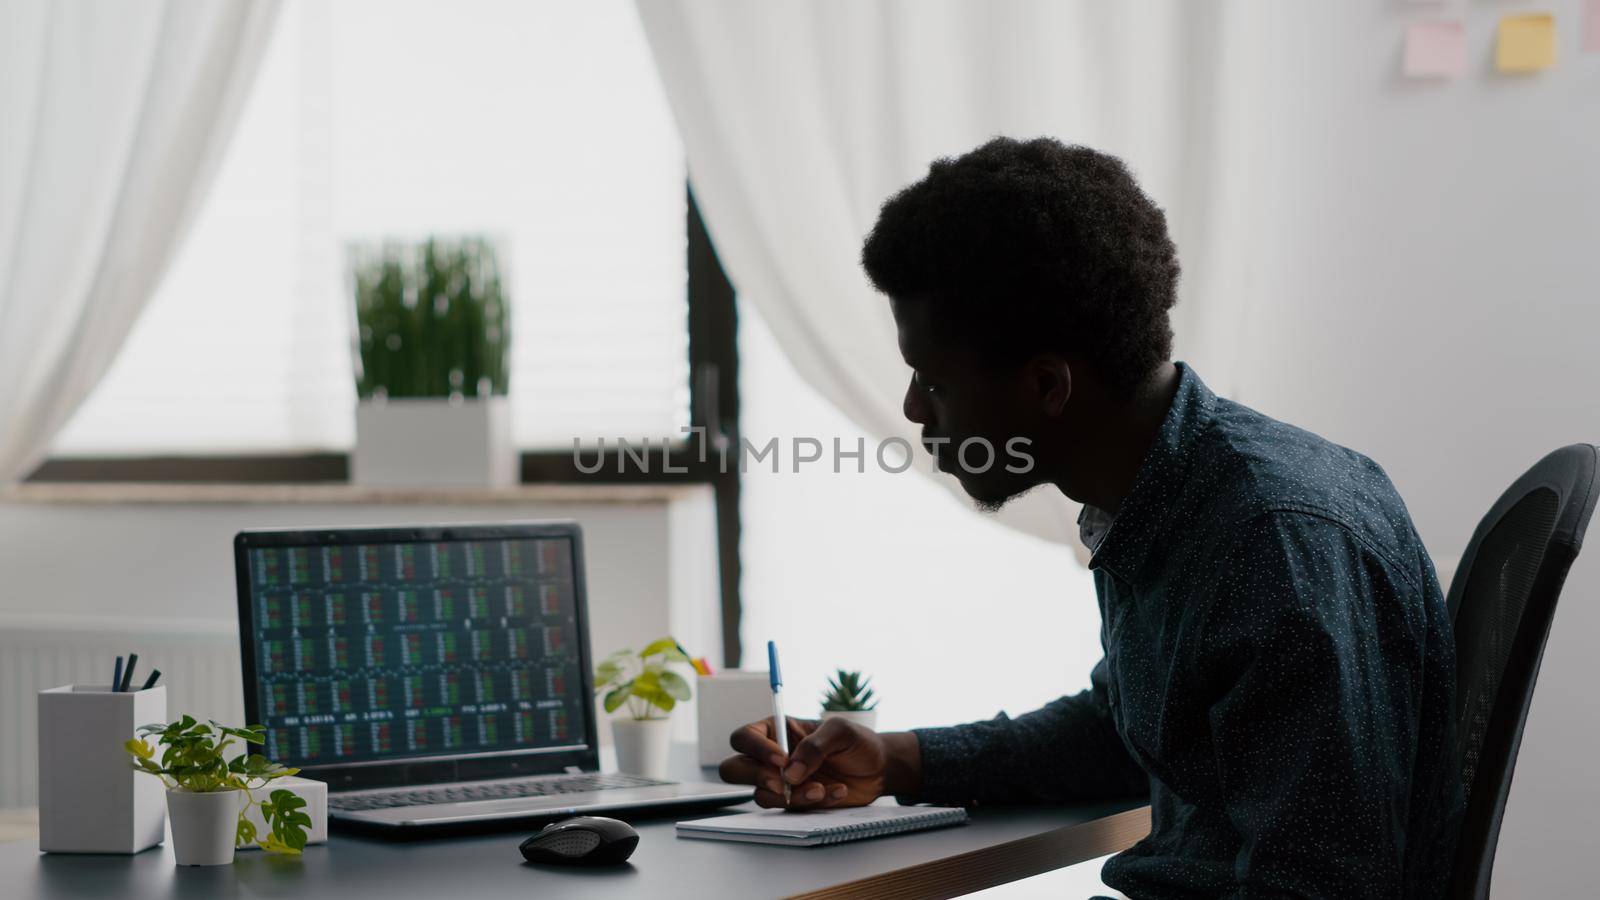 African american man analysing crypto currency stock markets trading checking stock ticker index by DCStudio